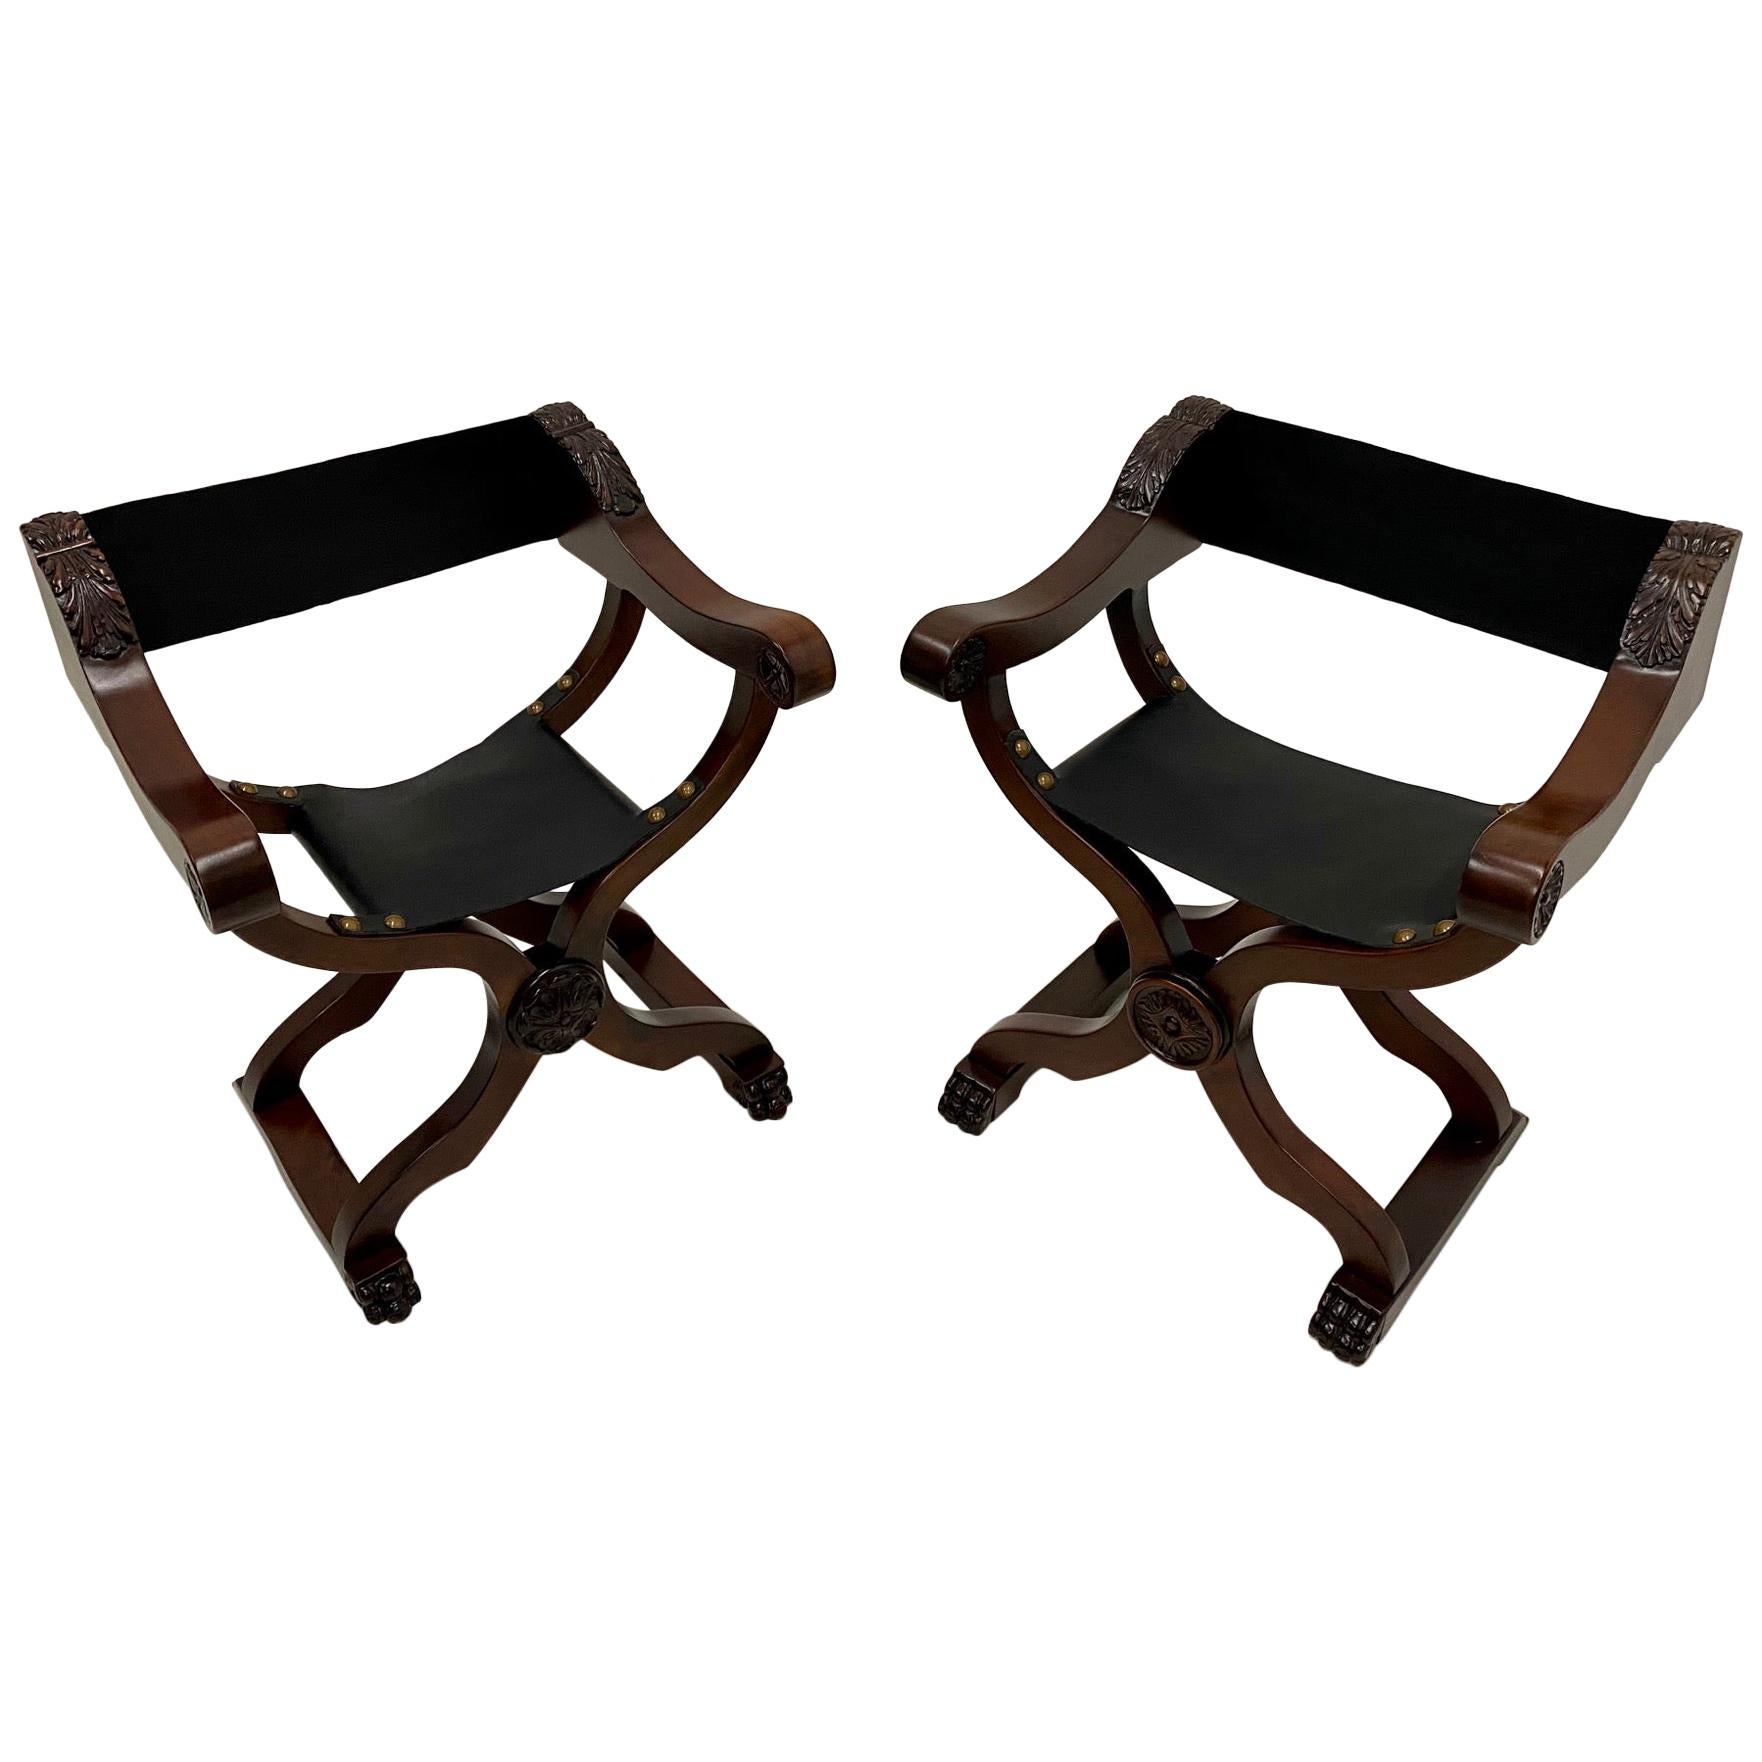 Fantastic Pair of Newly Restored Italian Baroque Style Savaranola Chairs For Sale